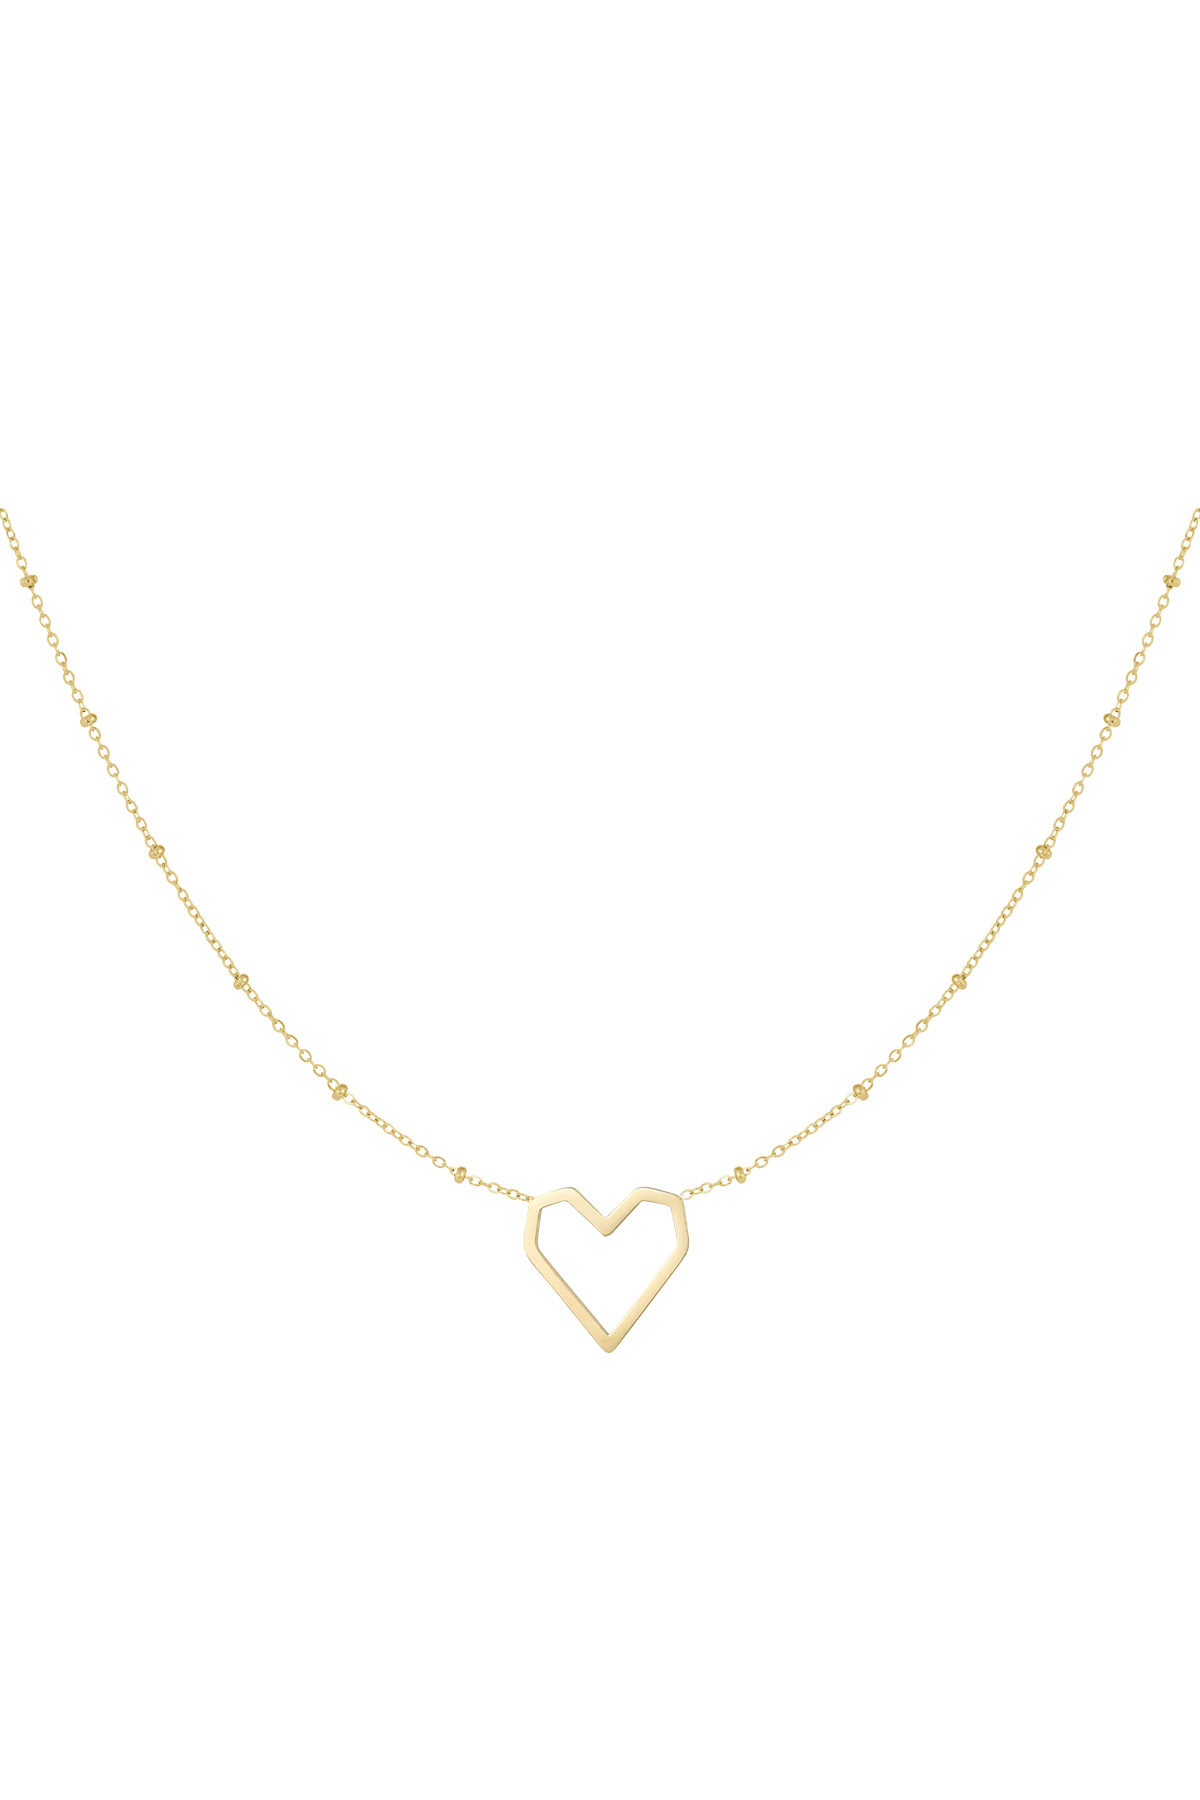 Necklace heart with dots - gold